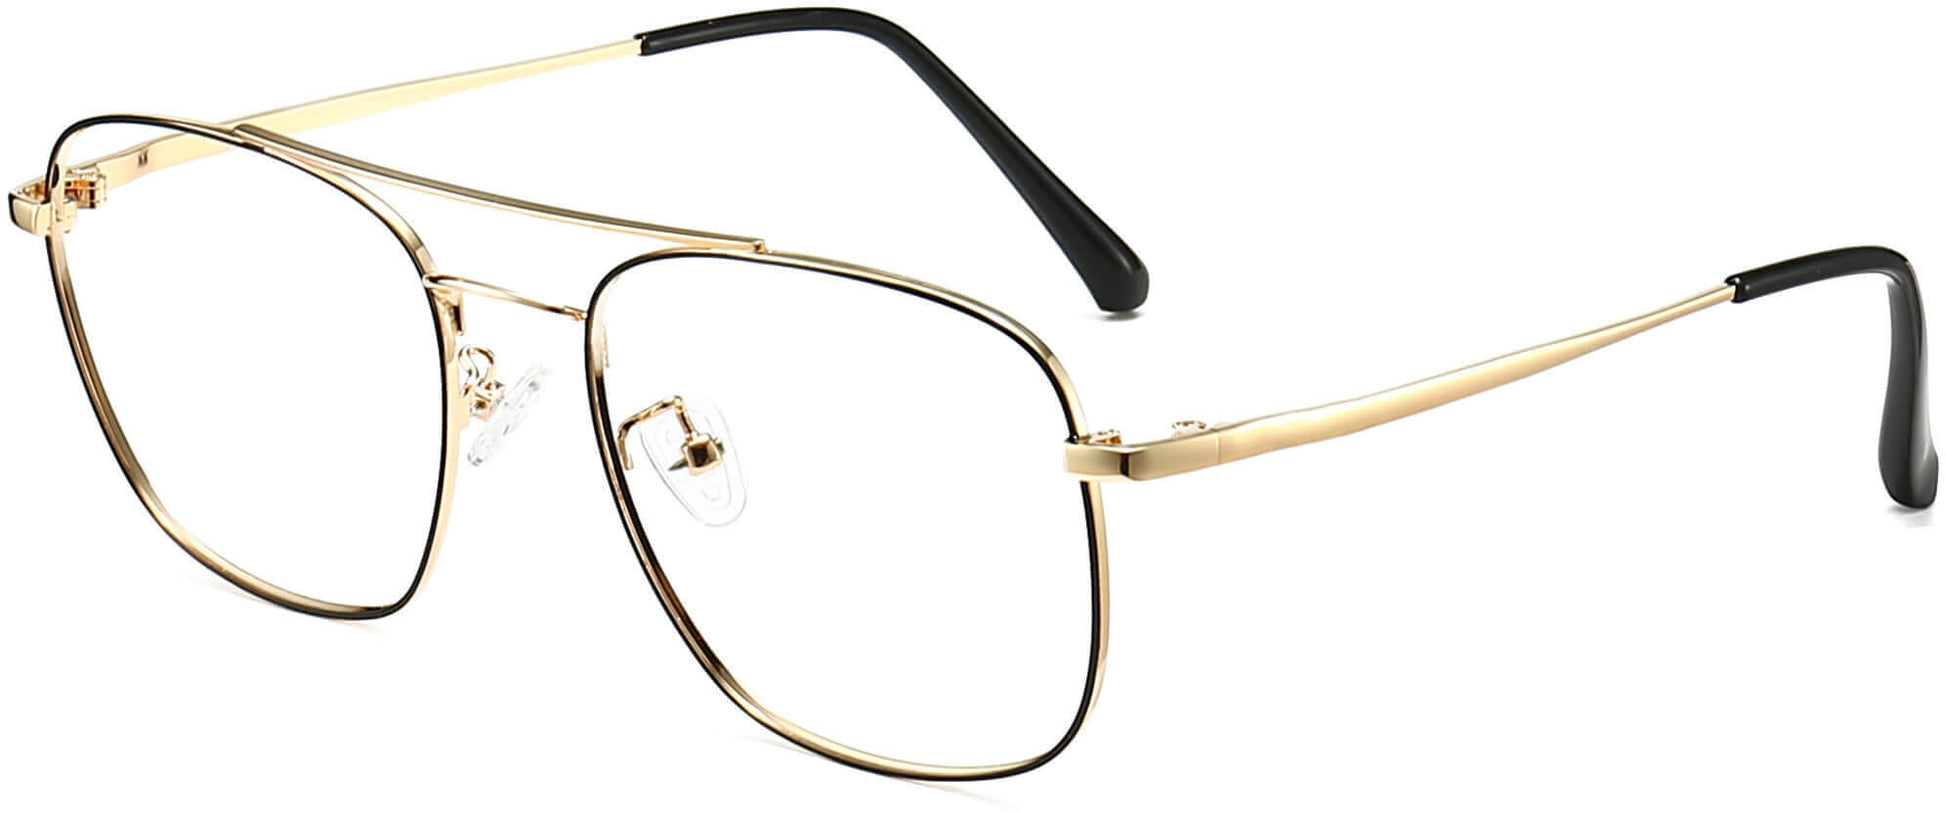 Harrison Square Gold Eyeglasses from ANRRI, angle view